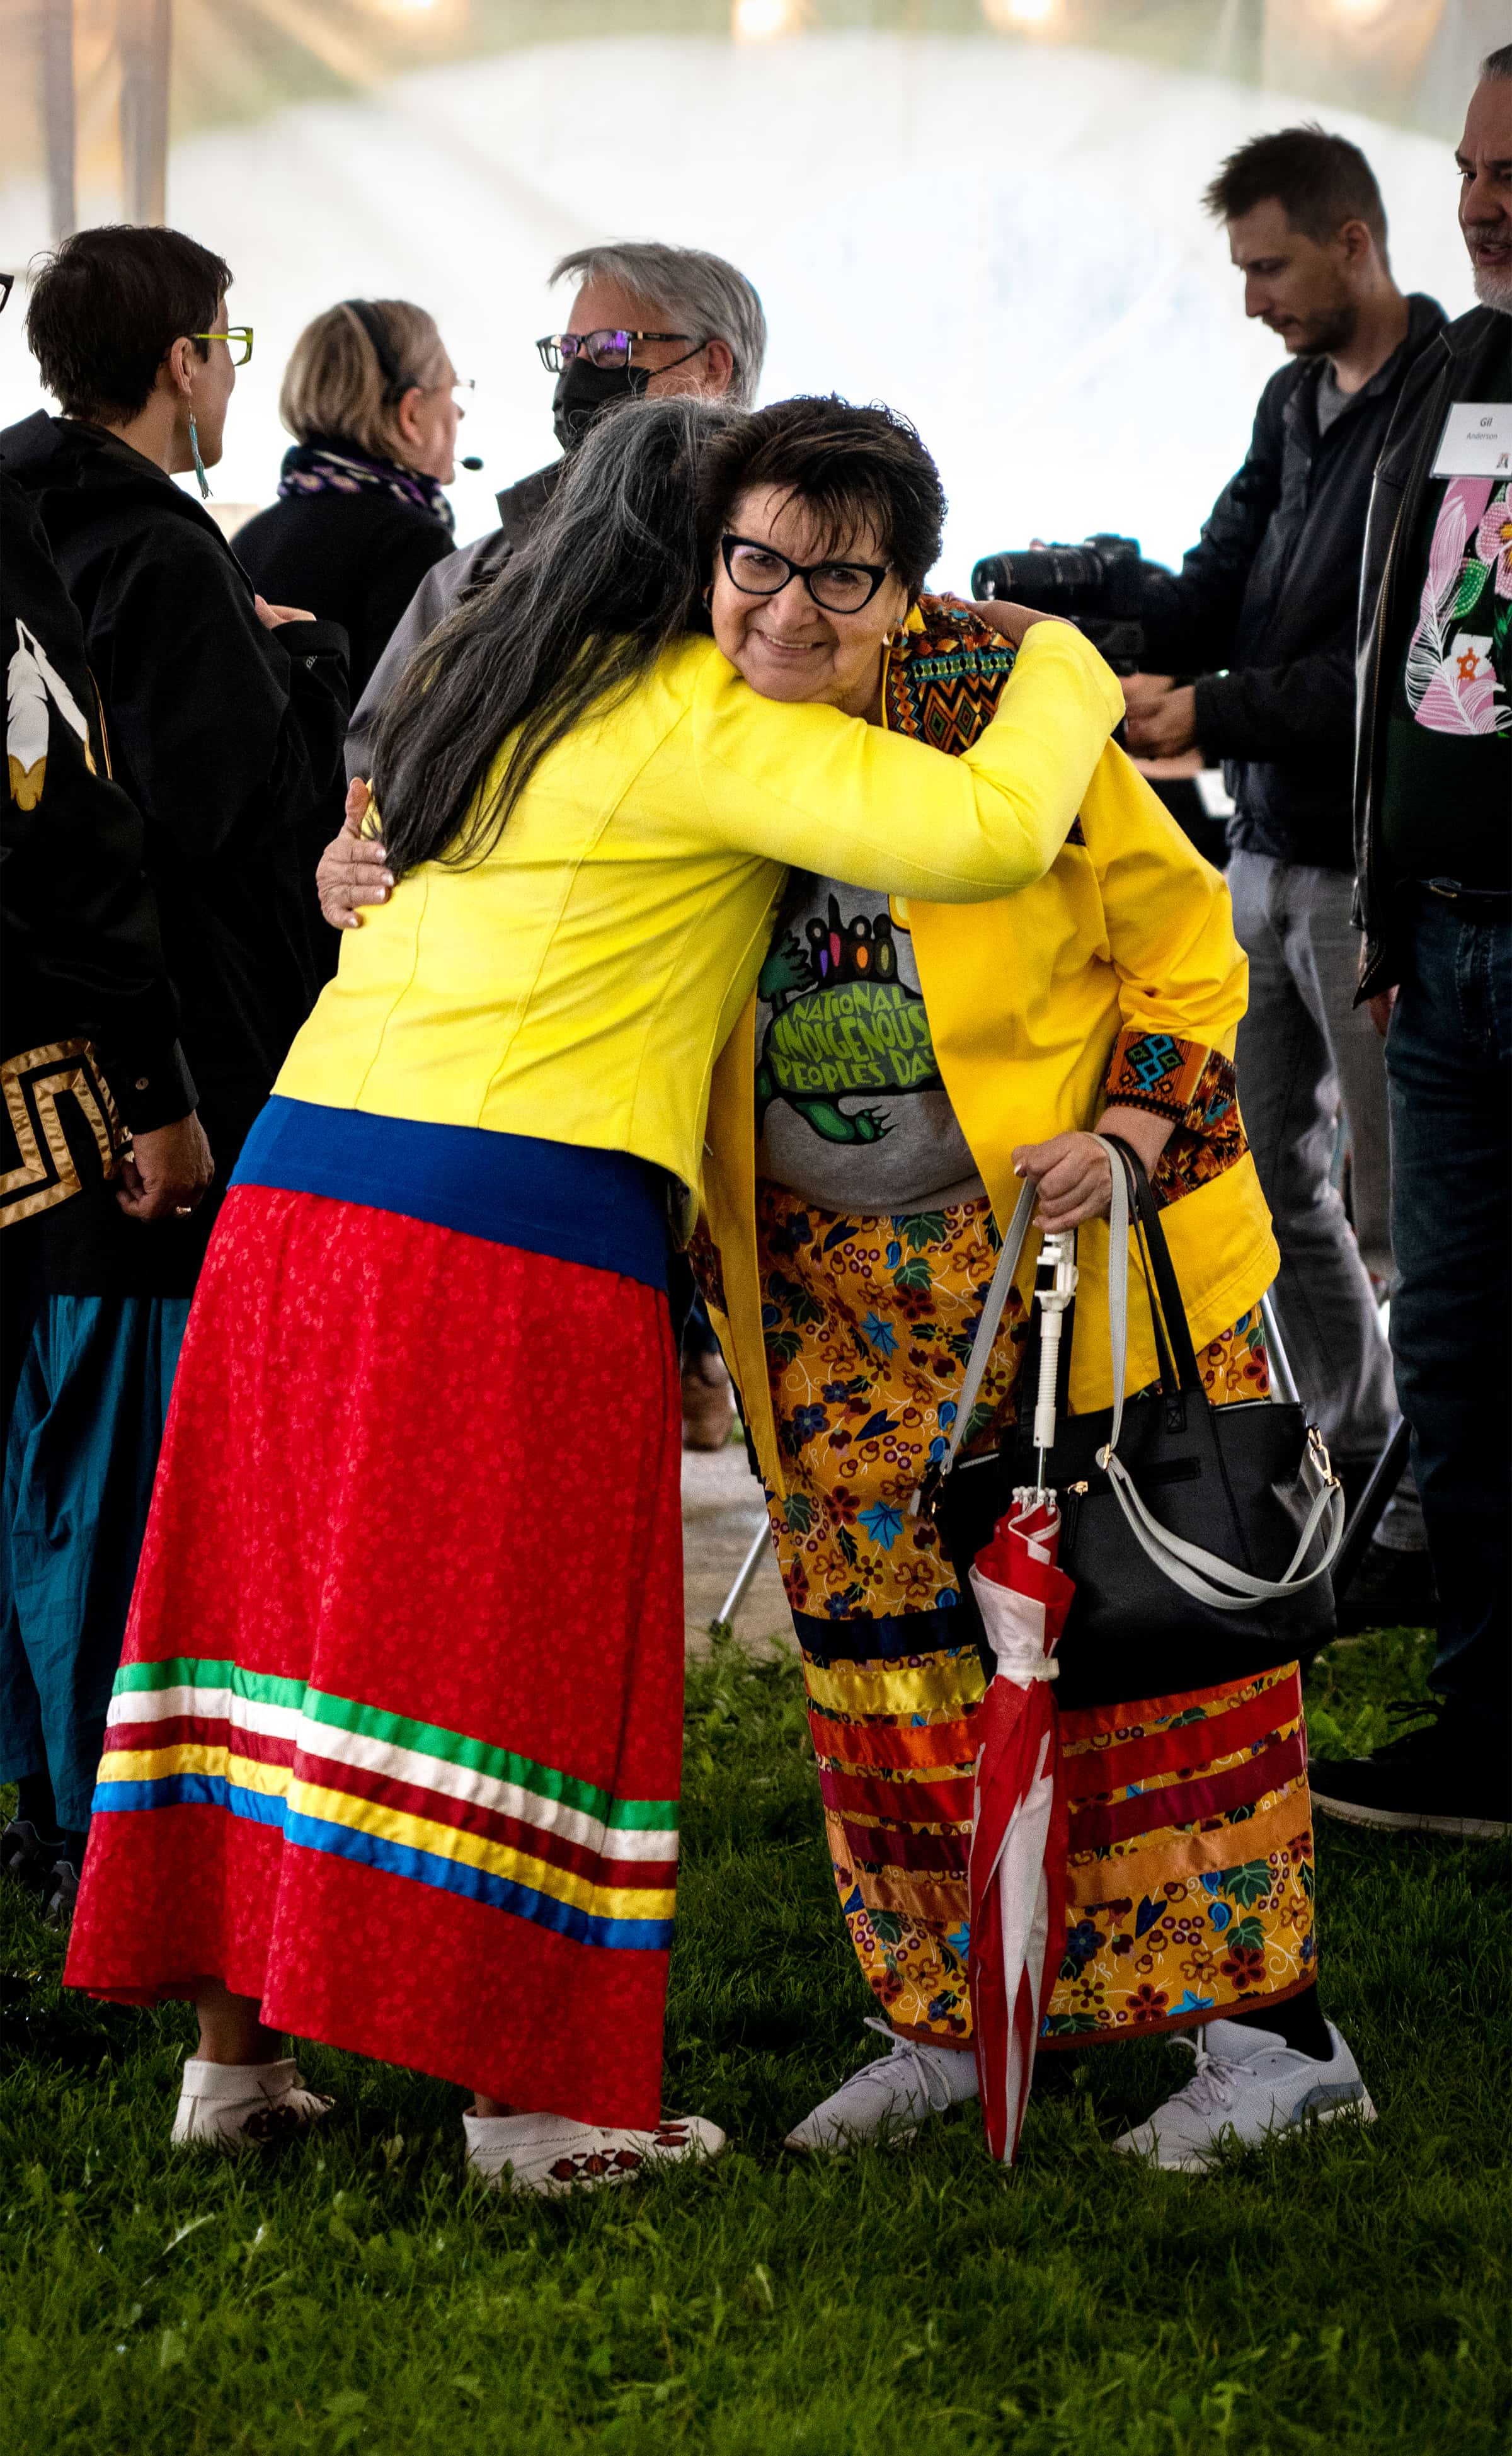 Bev Findlay, administrative assistant in the Faculty of Native Studies, gives Elder Elsey Gauthier a hug before the event.